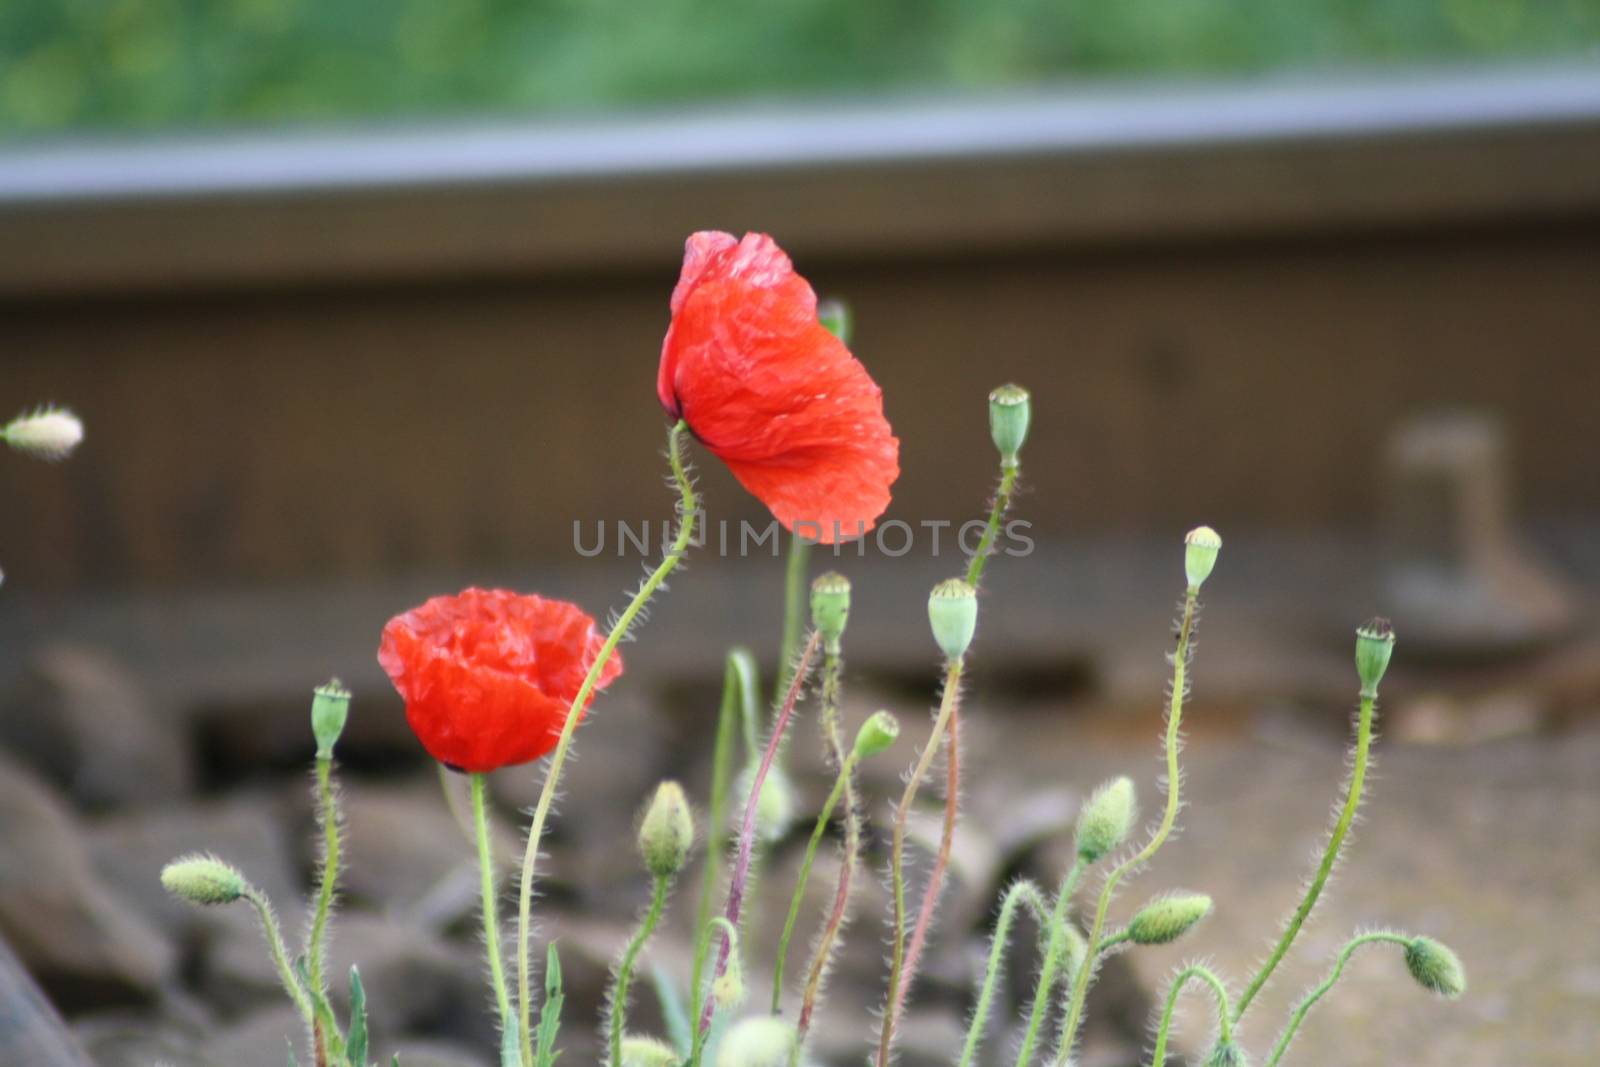 A close up of a red poppies by balage941